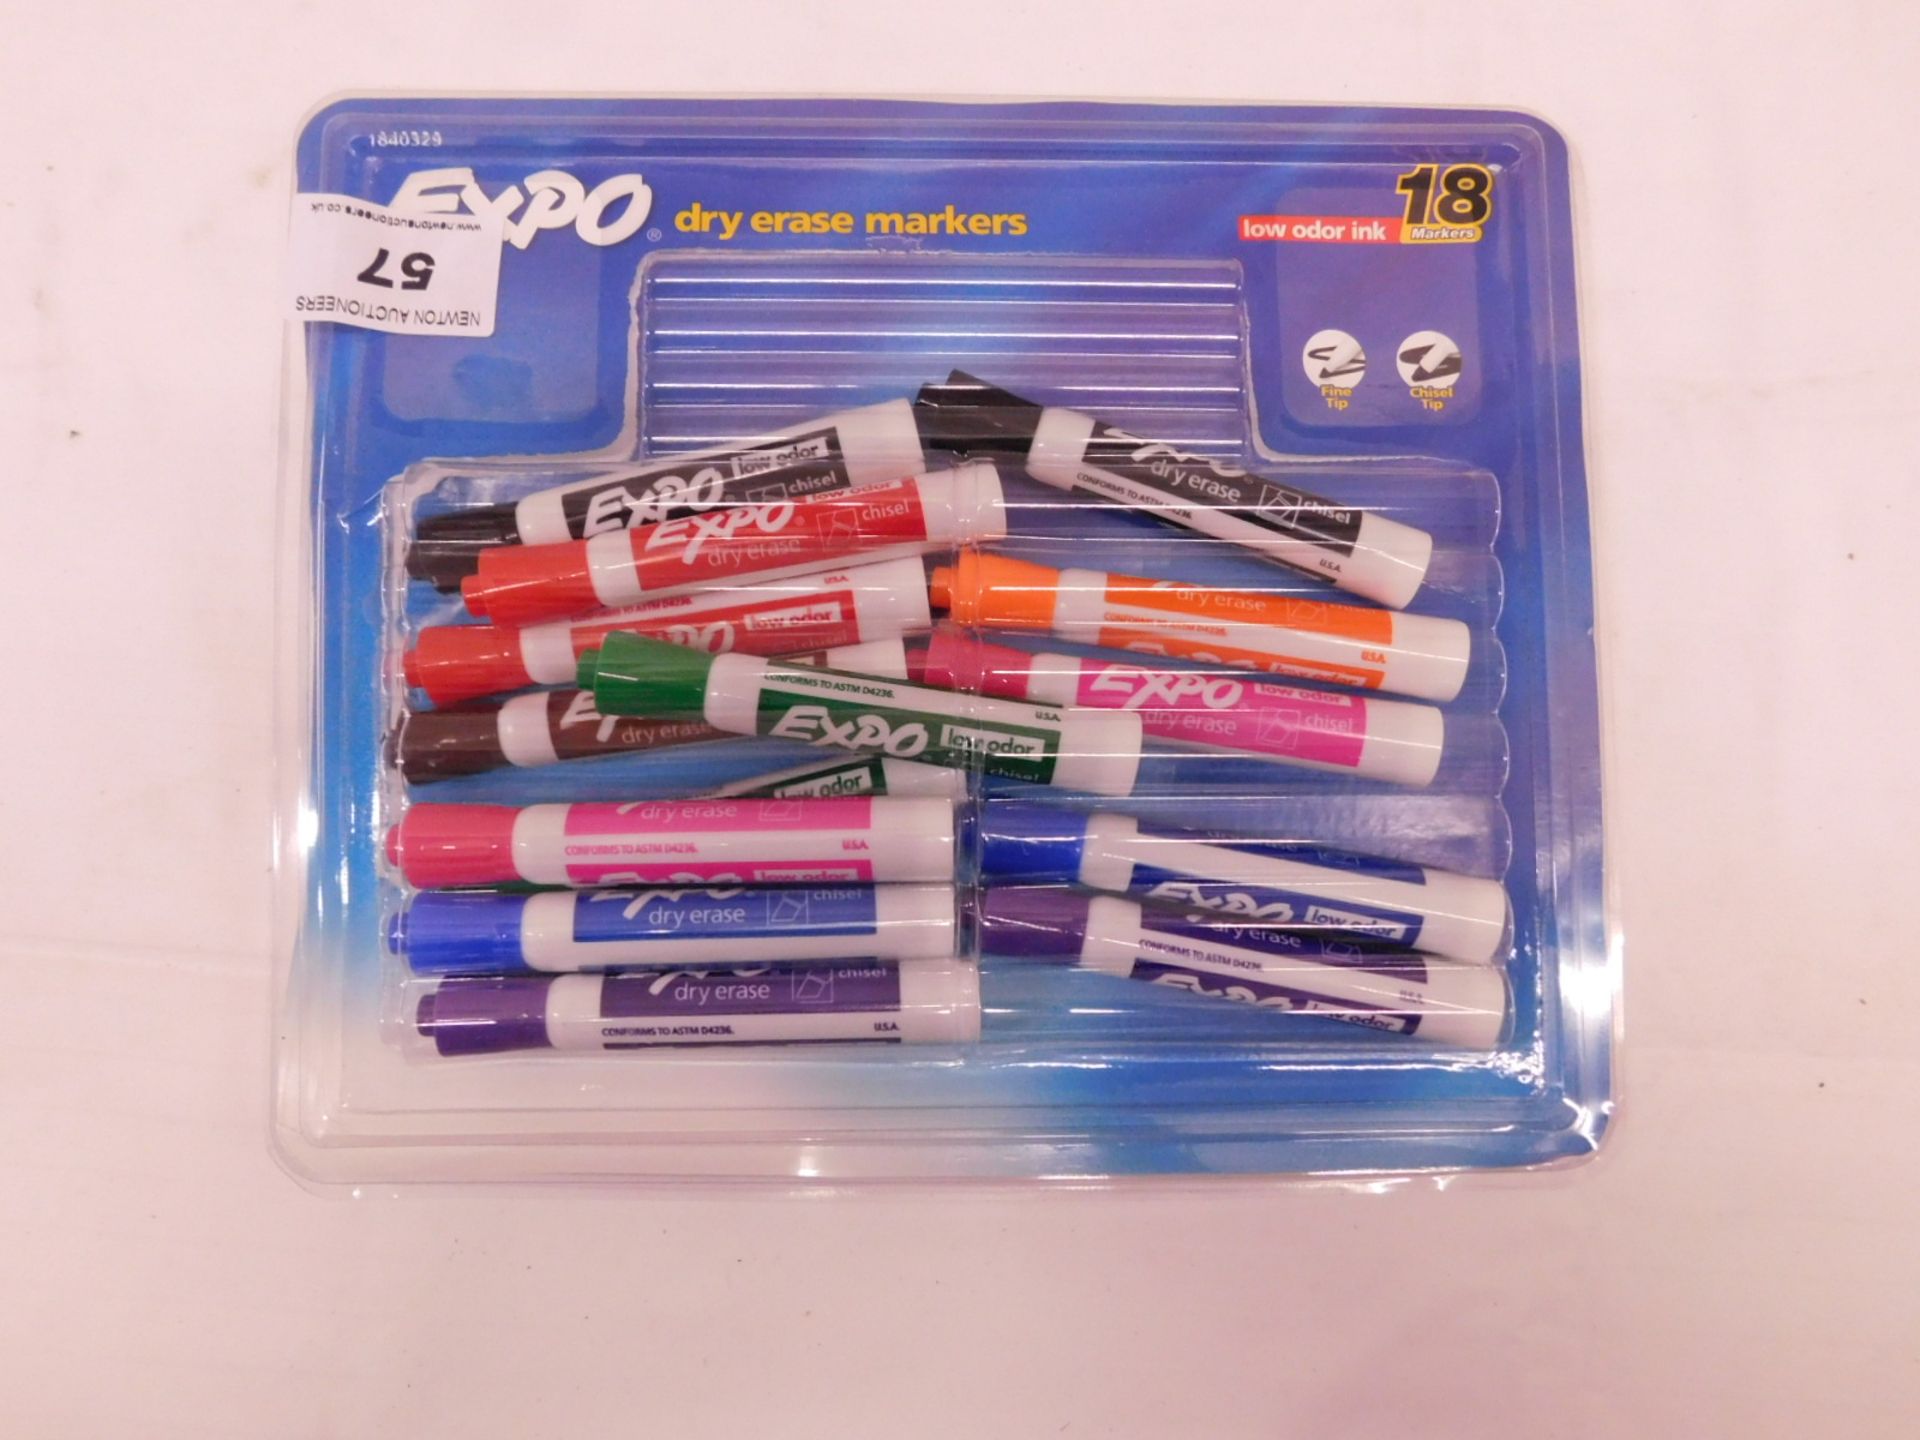 1 PACK OF 14 EXPO DRY ERASER MARKERS RRP £29.99